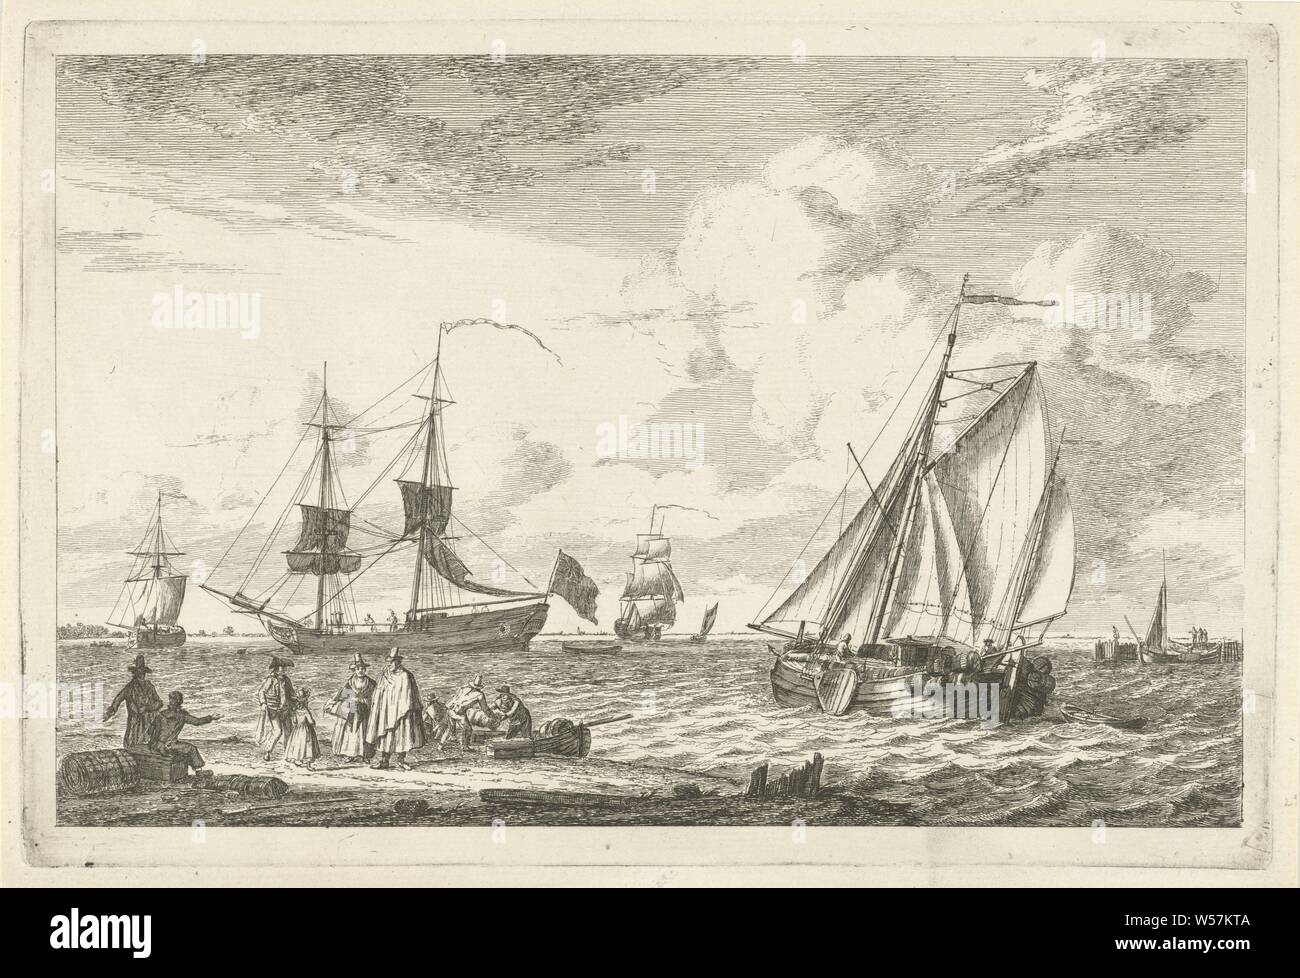 River view Several boats on the waves (series title), On the river you can see a barge loaded with tons. To the left is a two-master with an English flag. In the foreground on the left are a few people, including a man with a long cloak and a woman whose luggage is brought ashore from a boat. This print is part of a series of five prints with different sailing ships, ships (in general), Gerrit Groenewegen, 1793, paper, etching, h 183 mm × w 271 mm Stock Photo